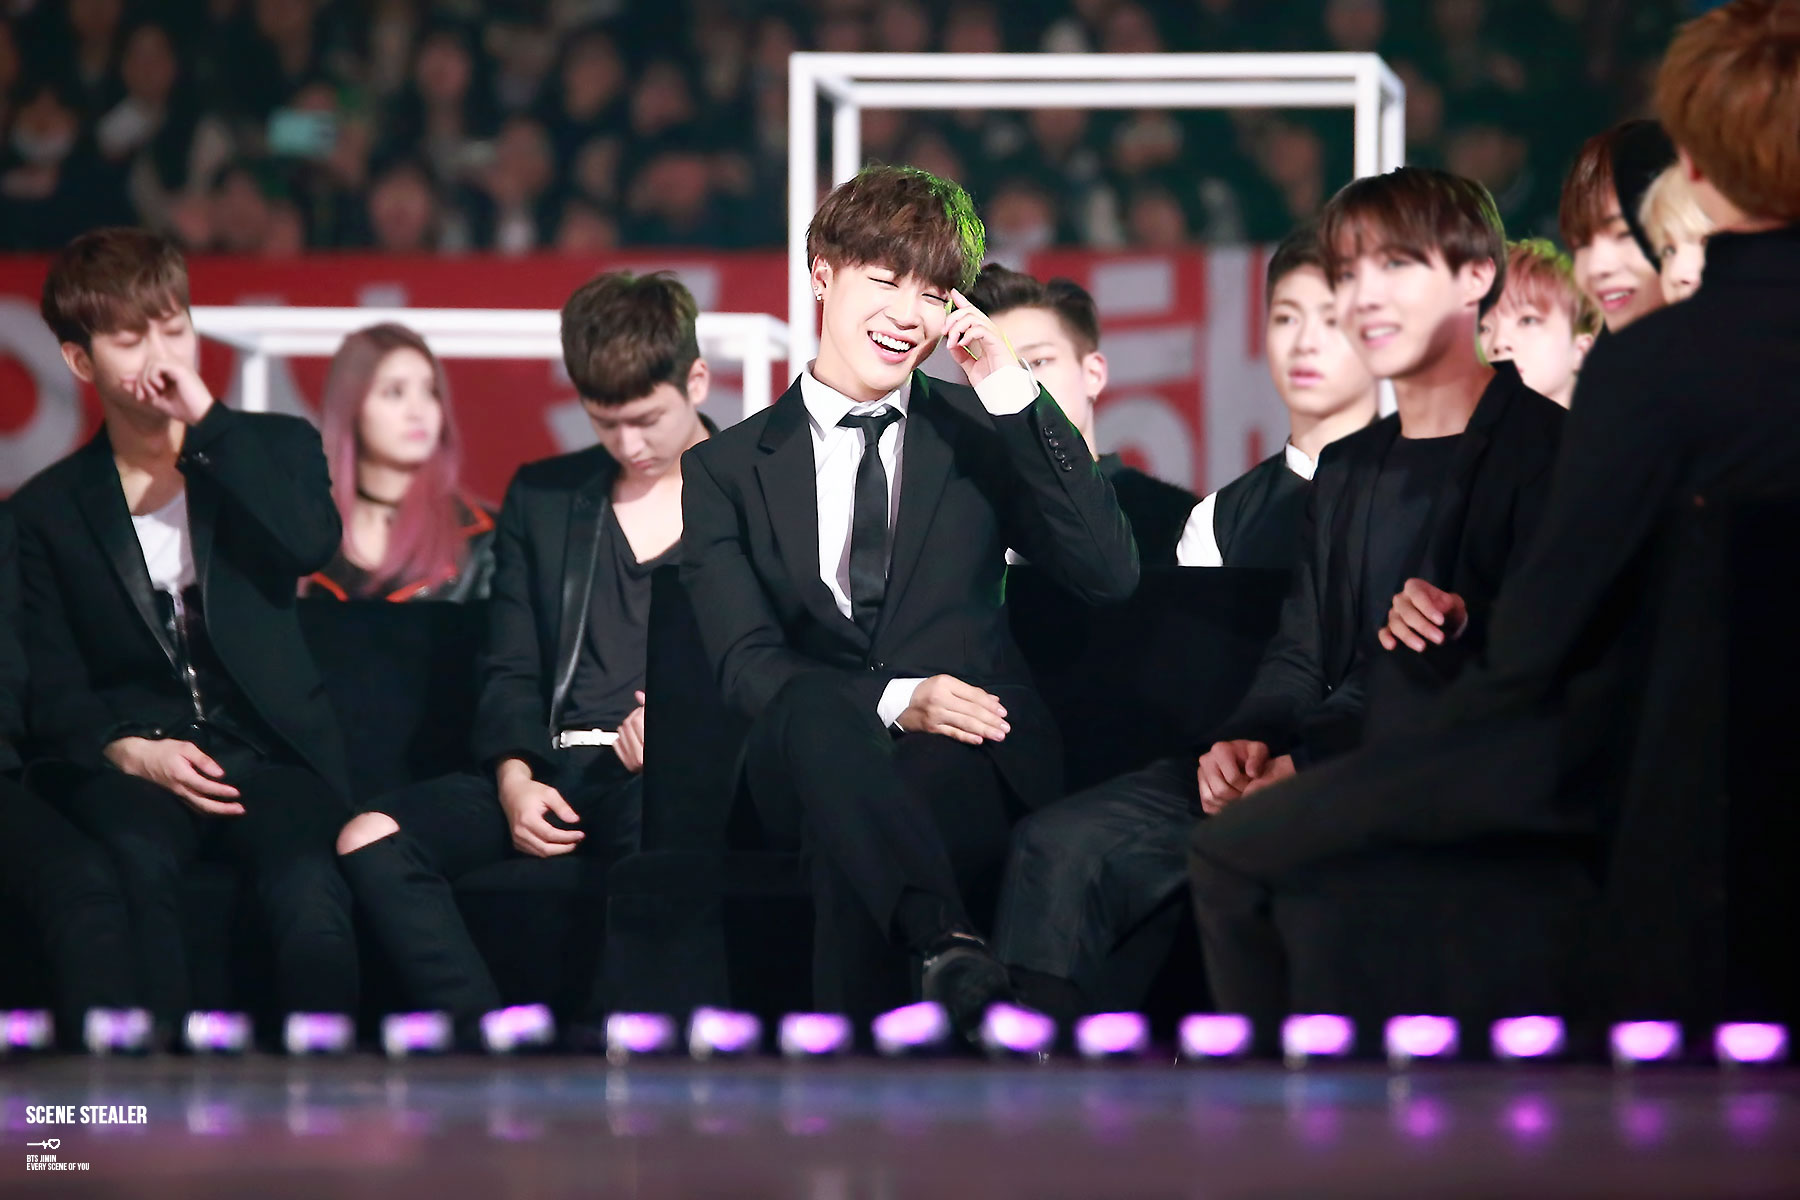 BTS at the Melon Music Awards in 2015